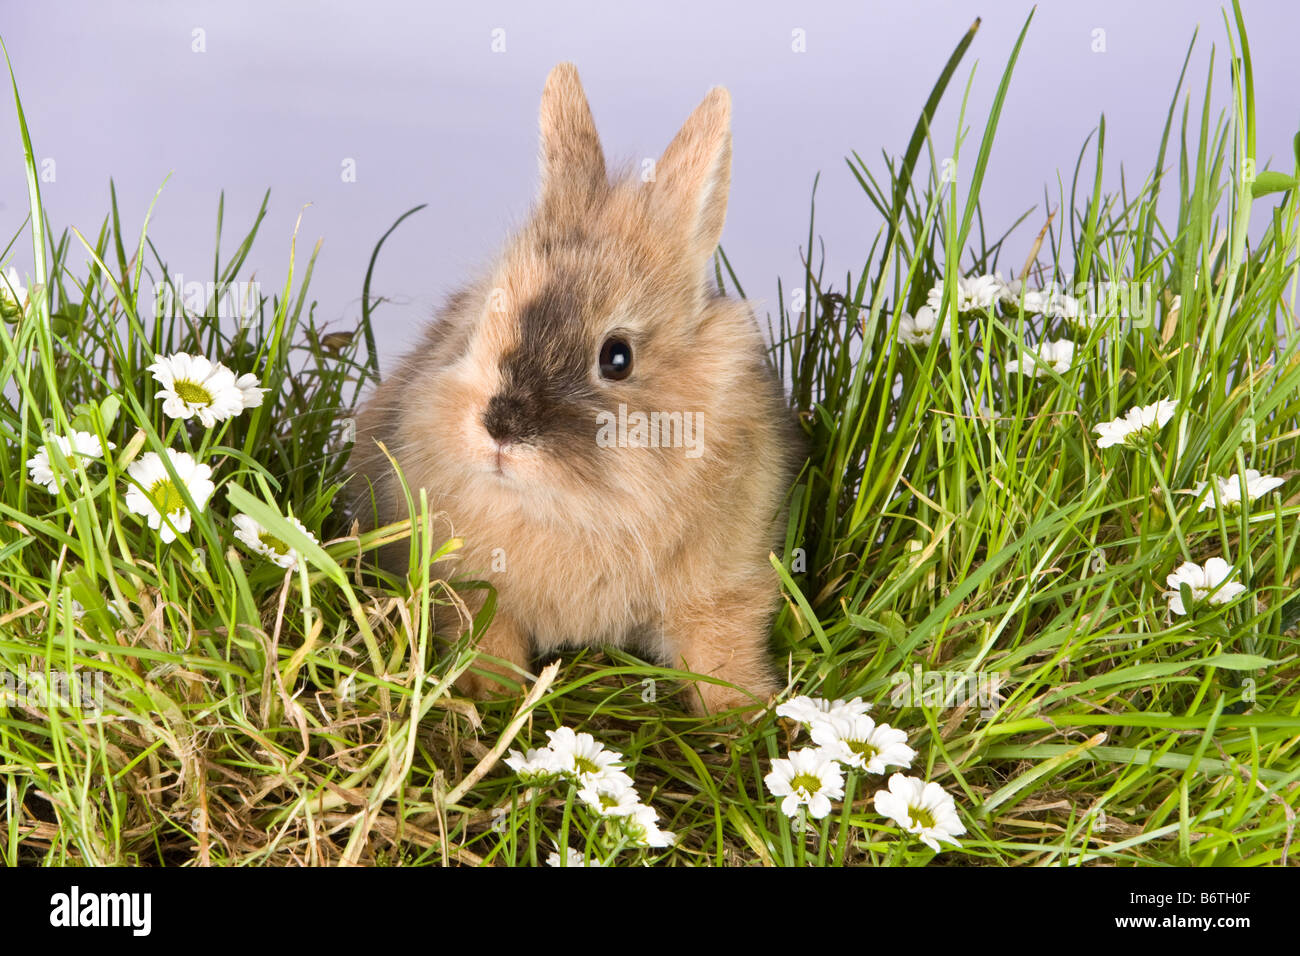 Young spring rabbit looking around in a patch of grass Stock Photo